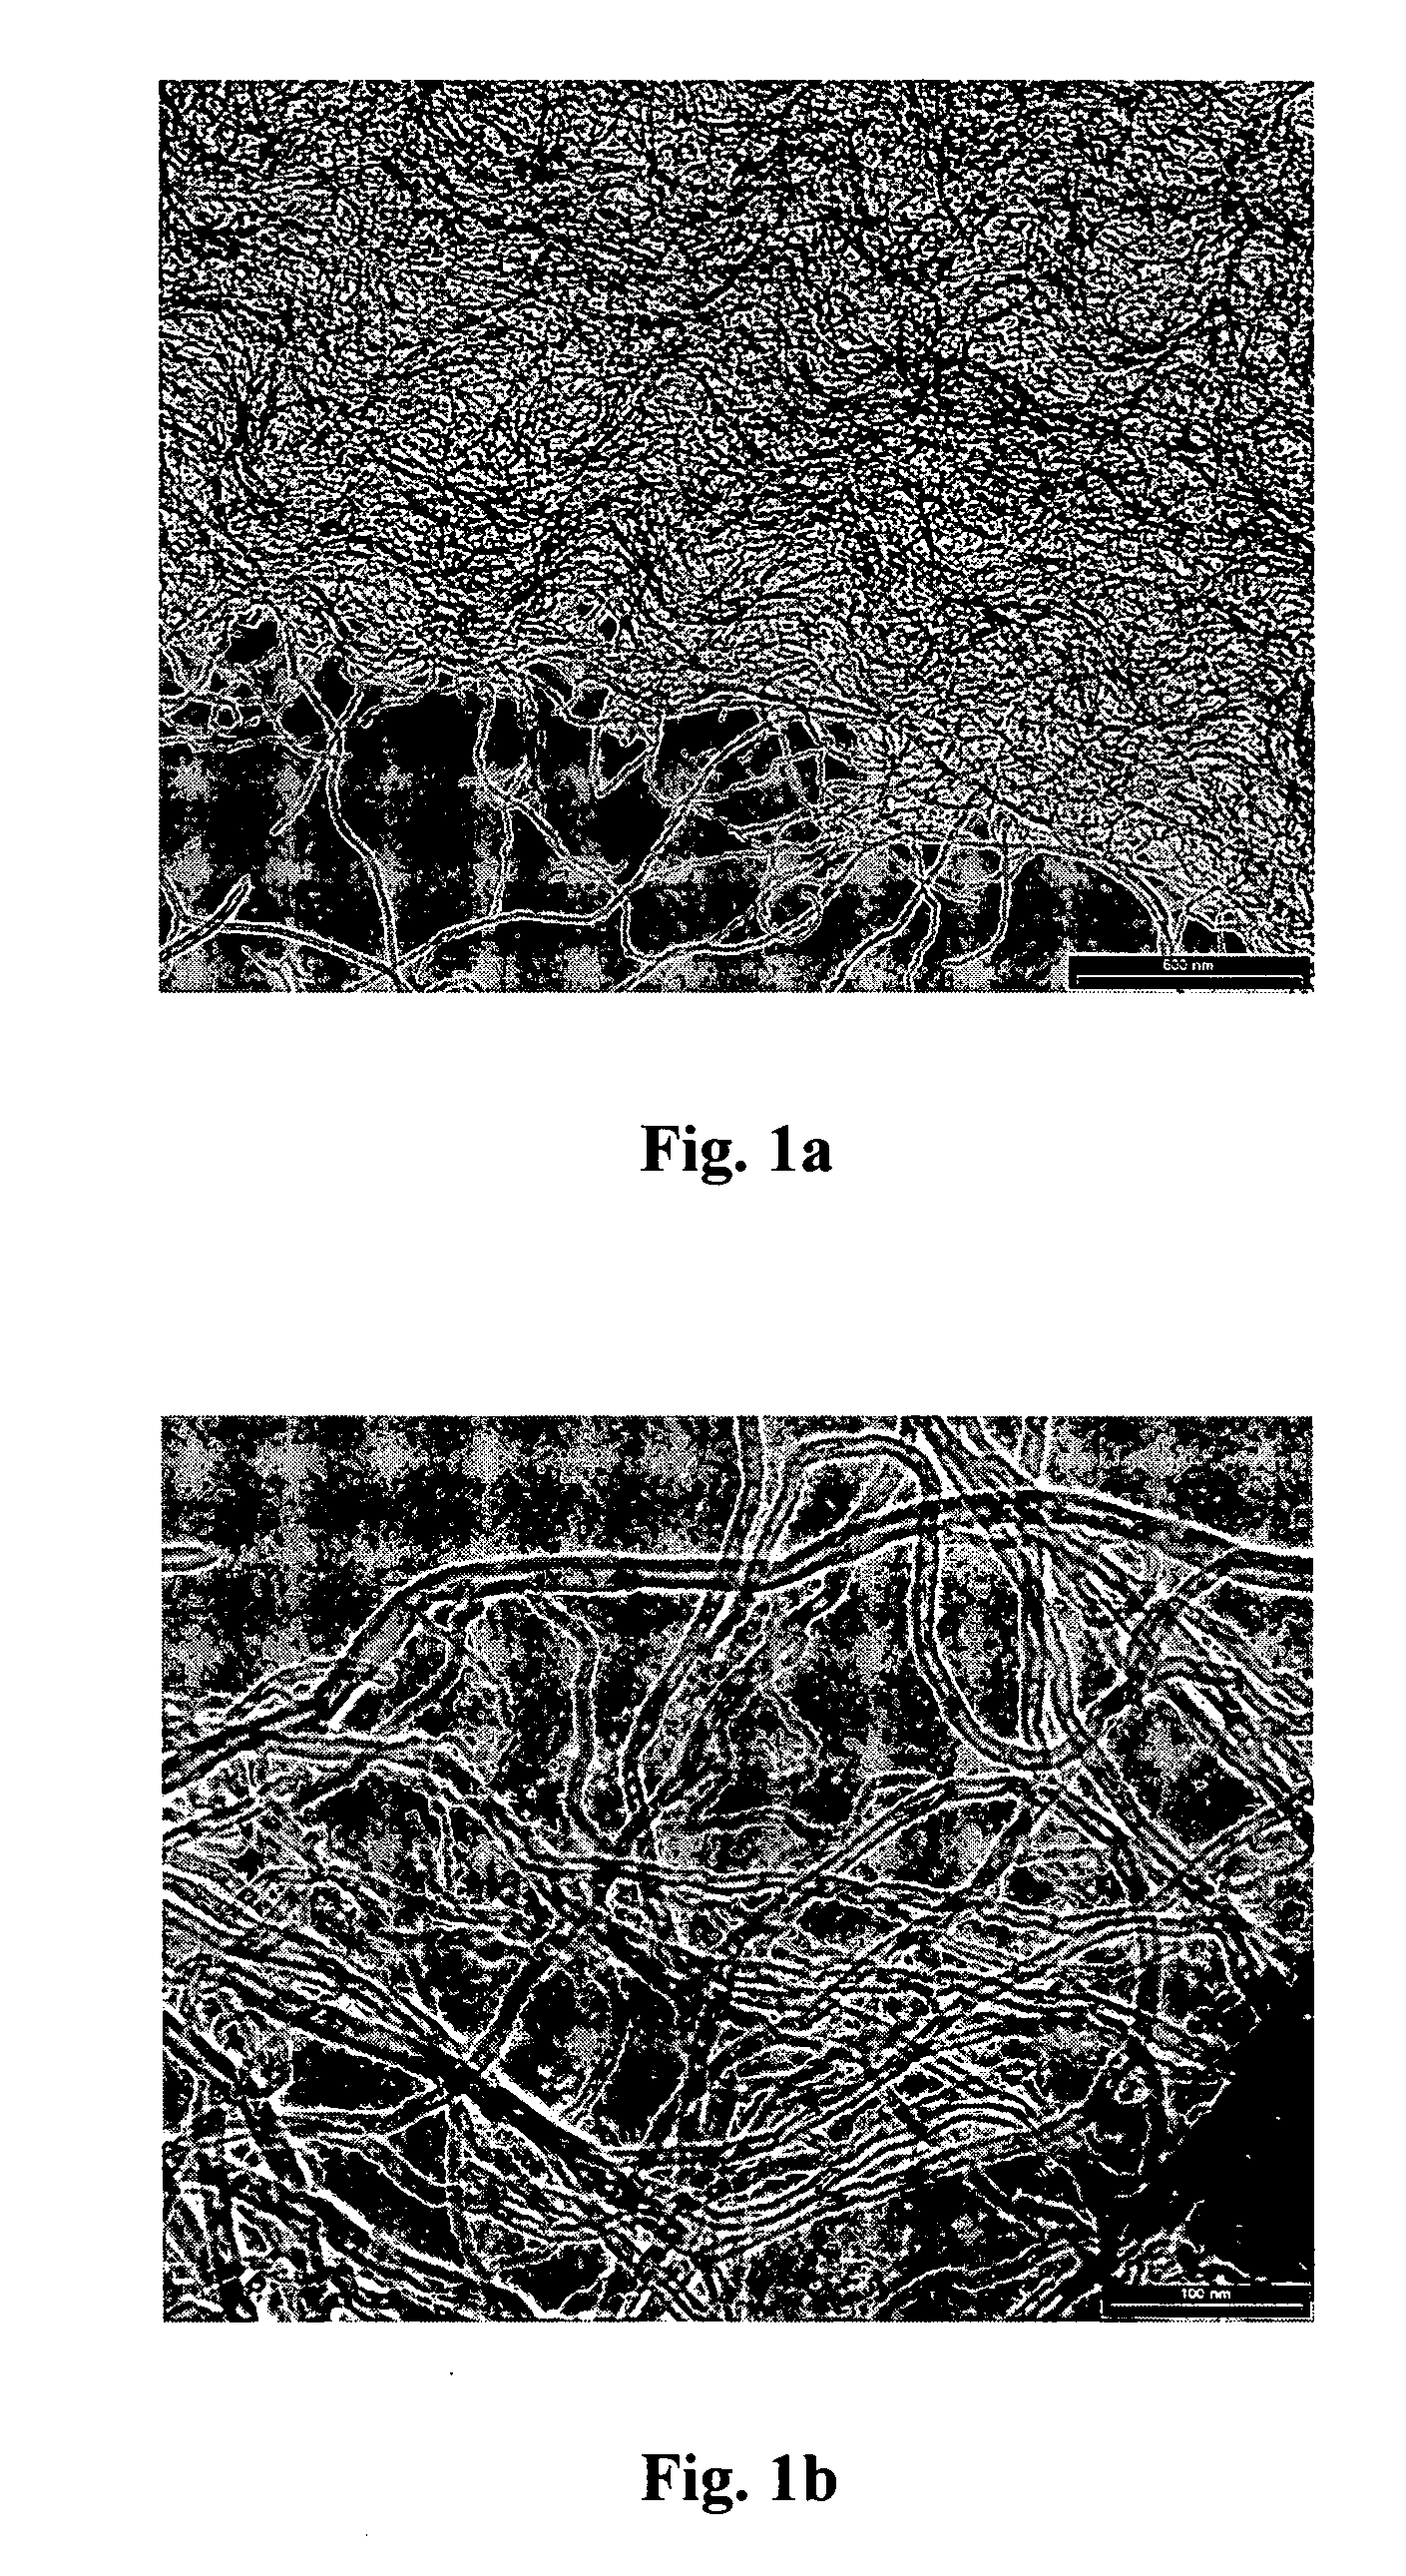 Polymeric compositions containing nanotubes